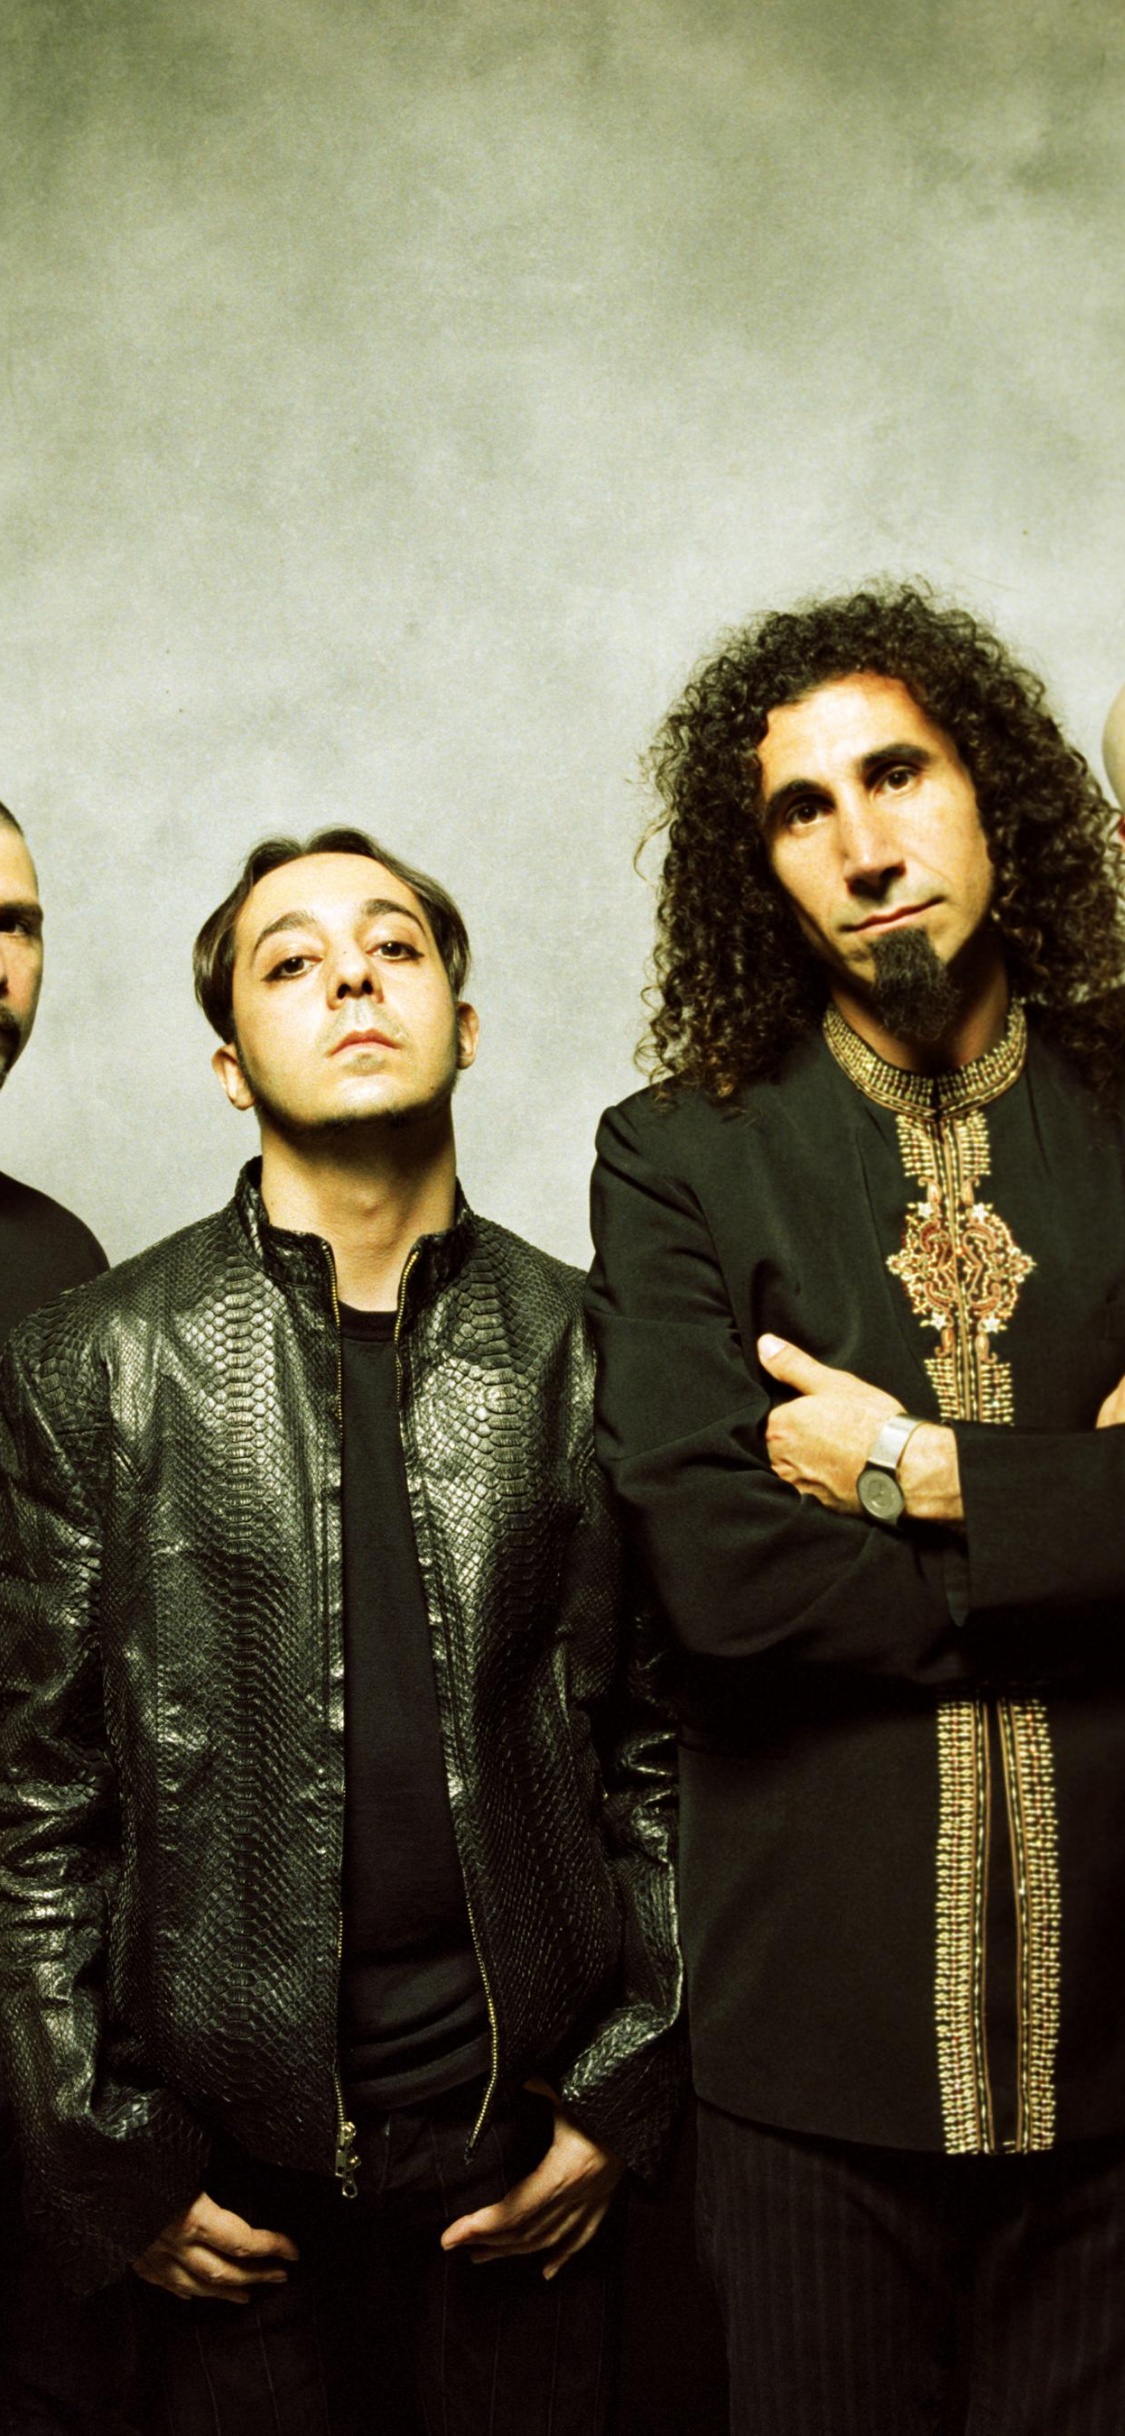 System Of A Down, Heavy Metal, Social Group, Fun, Event. Wallpaper in 1125x2436 Resolution